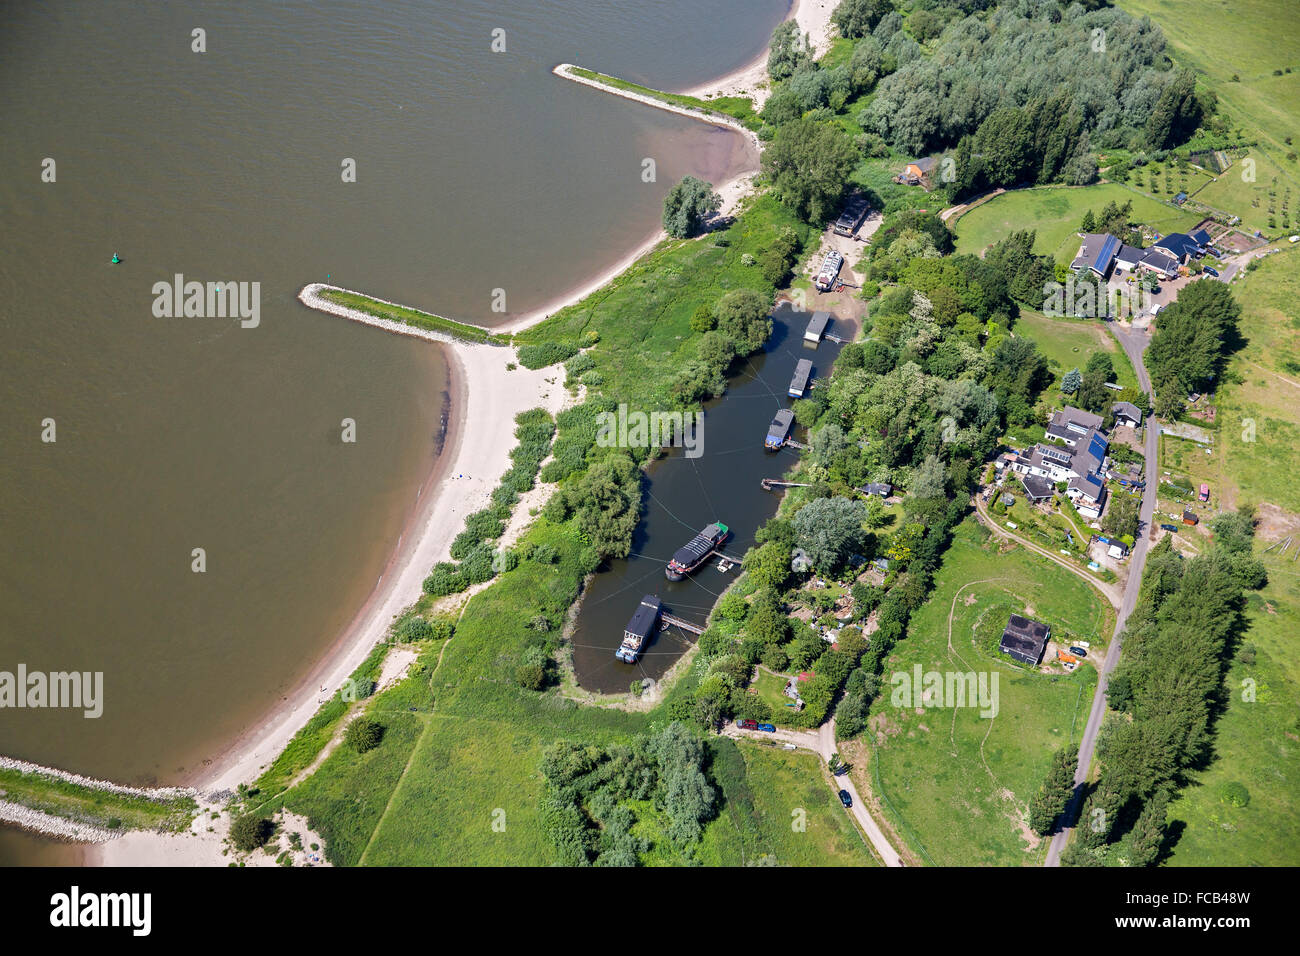 Netherlands, Ooij, Houseboats near Waal river, aerial Stock Photo